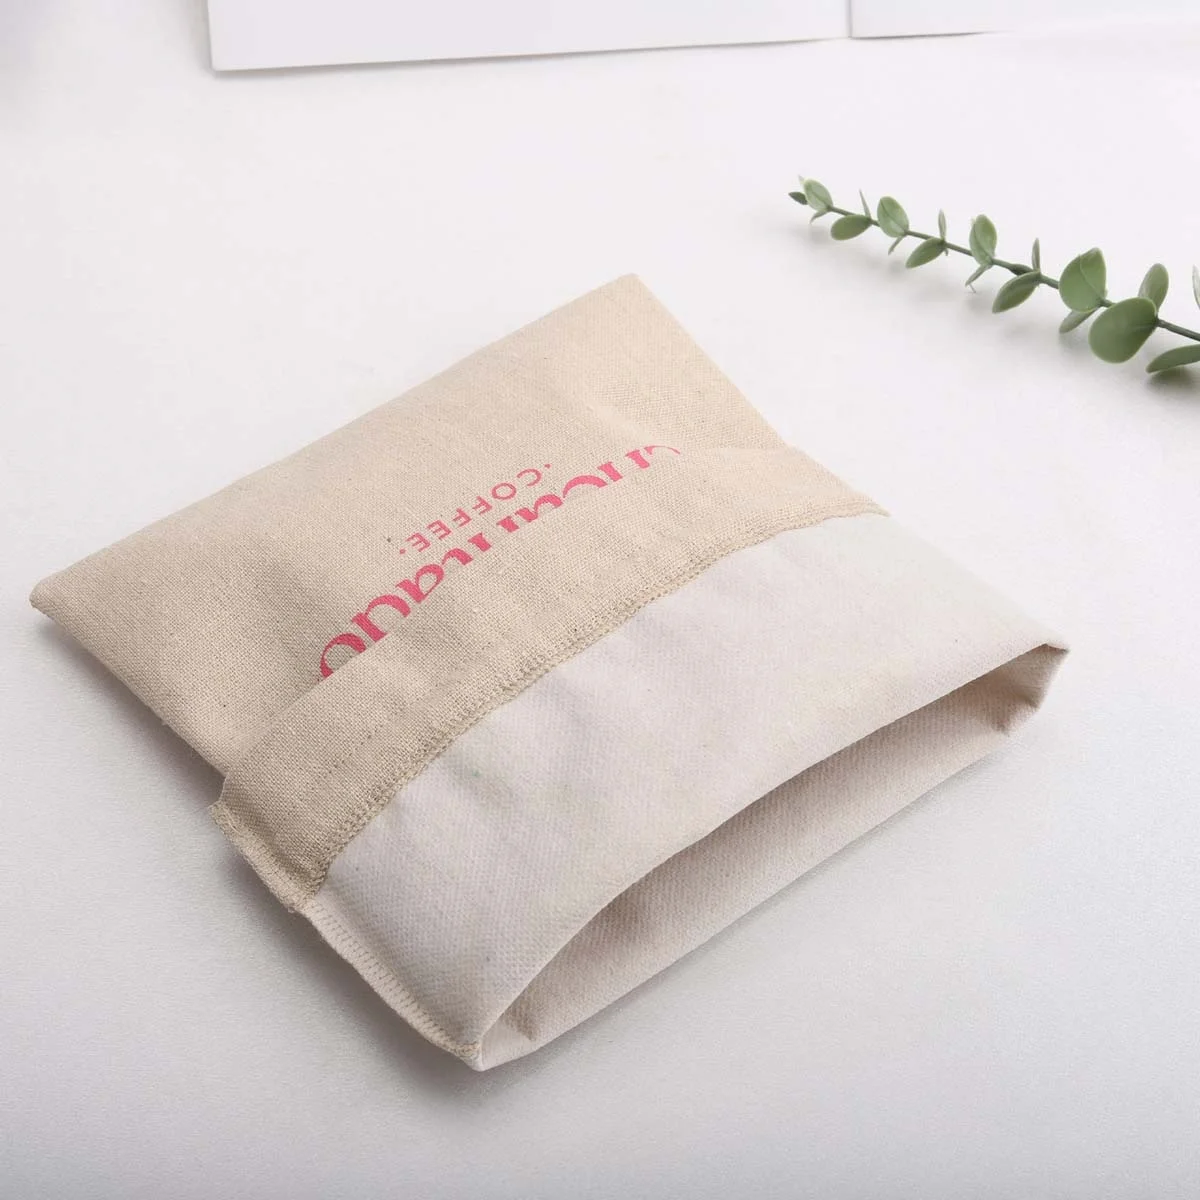 High Quality Jute Fabric Christmas Candy Wedding Party Gift Coffee Bag Eco Reusable Jute Sack Burlap Linen Packaging Pouch